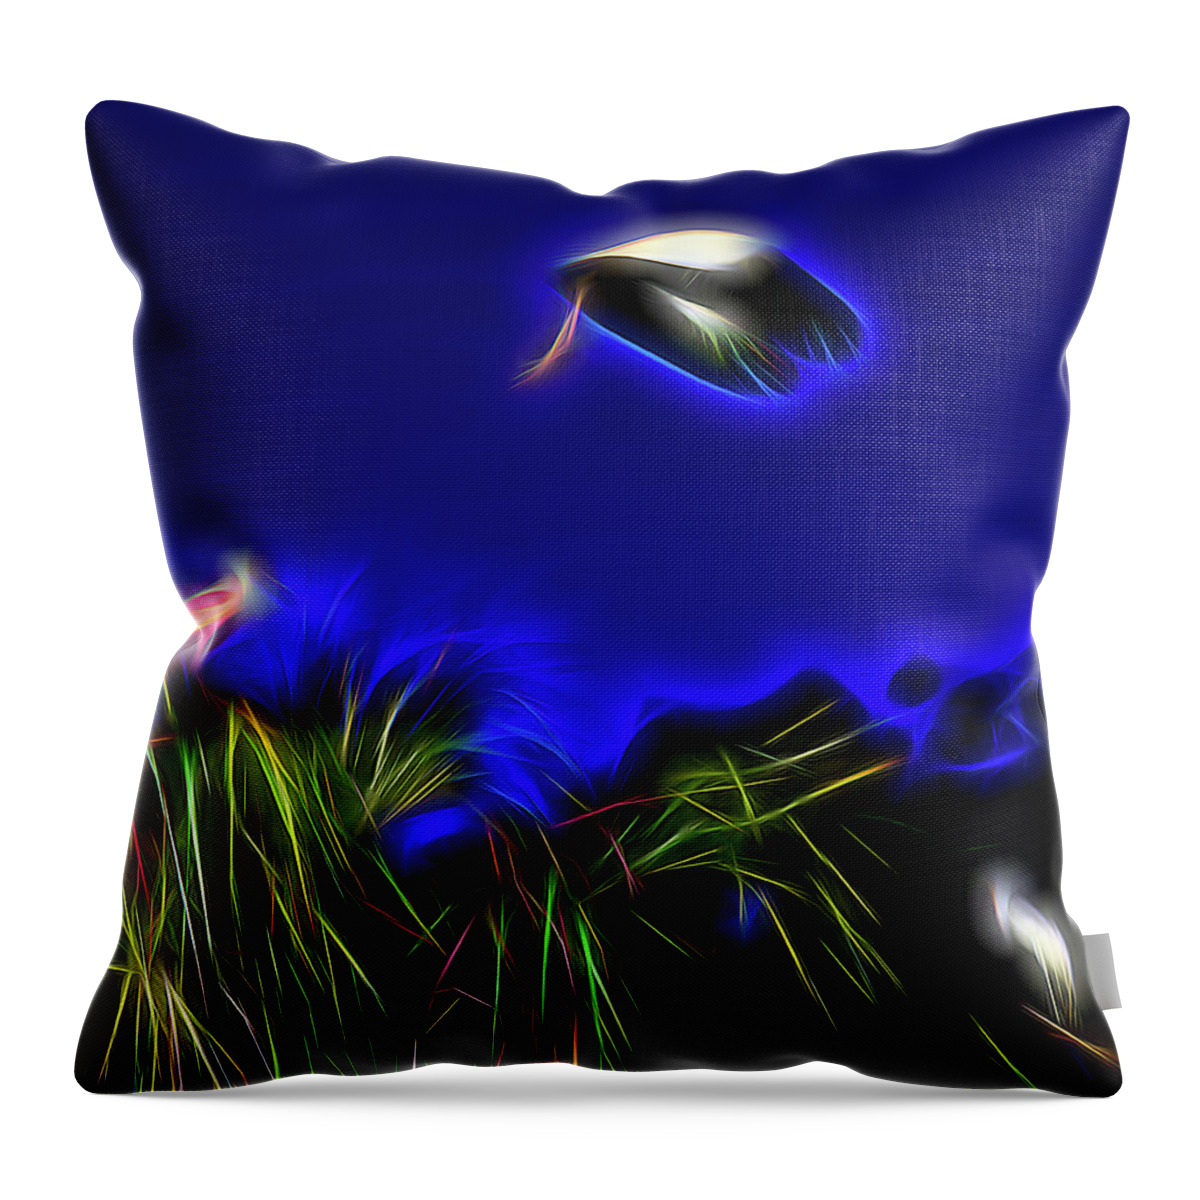 Abstract Throw Pillow featuring the digital art Redemption by William Horden